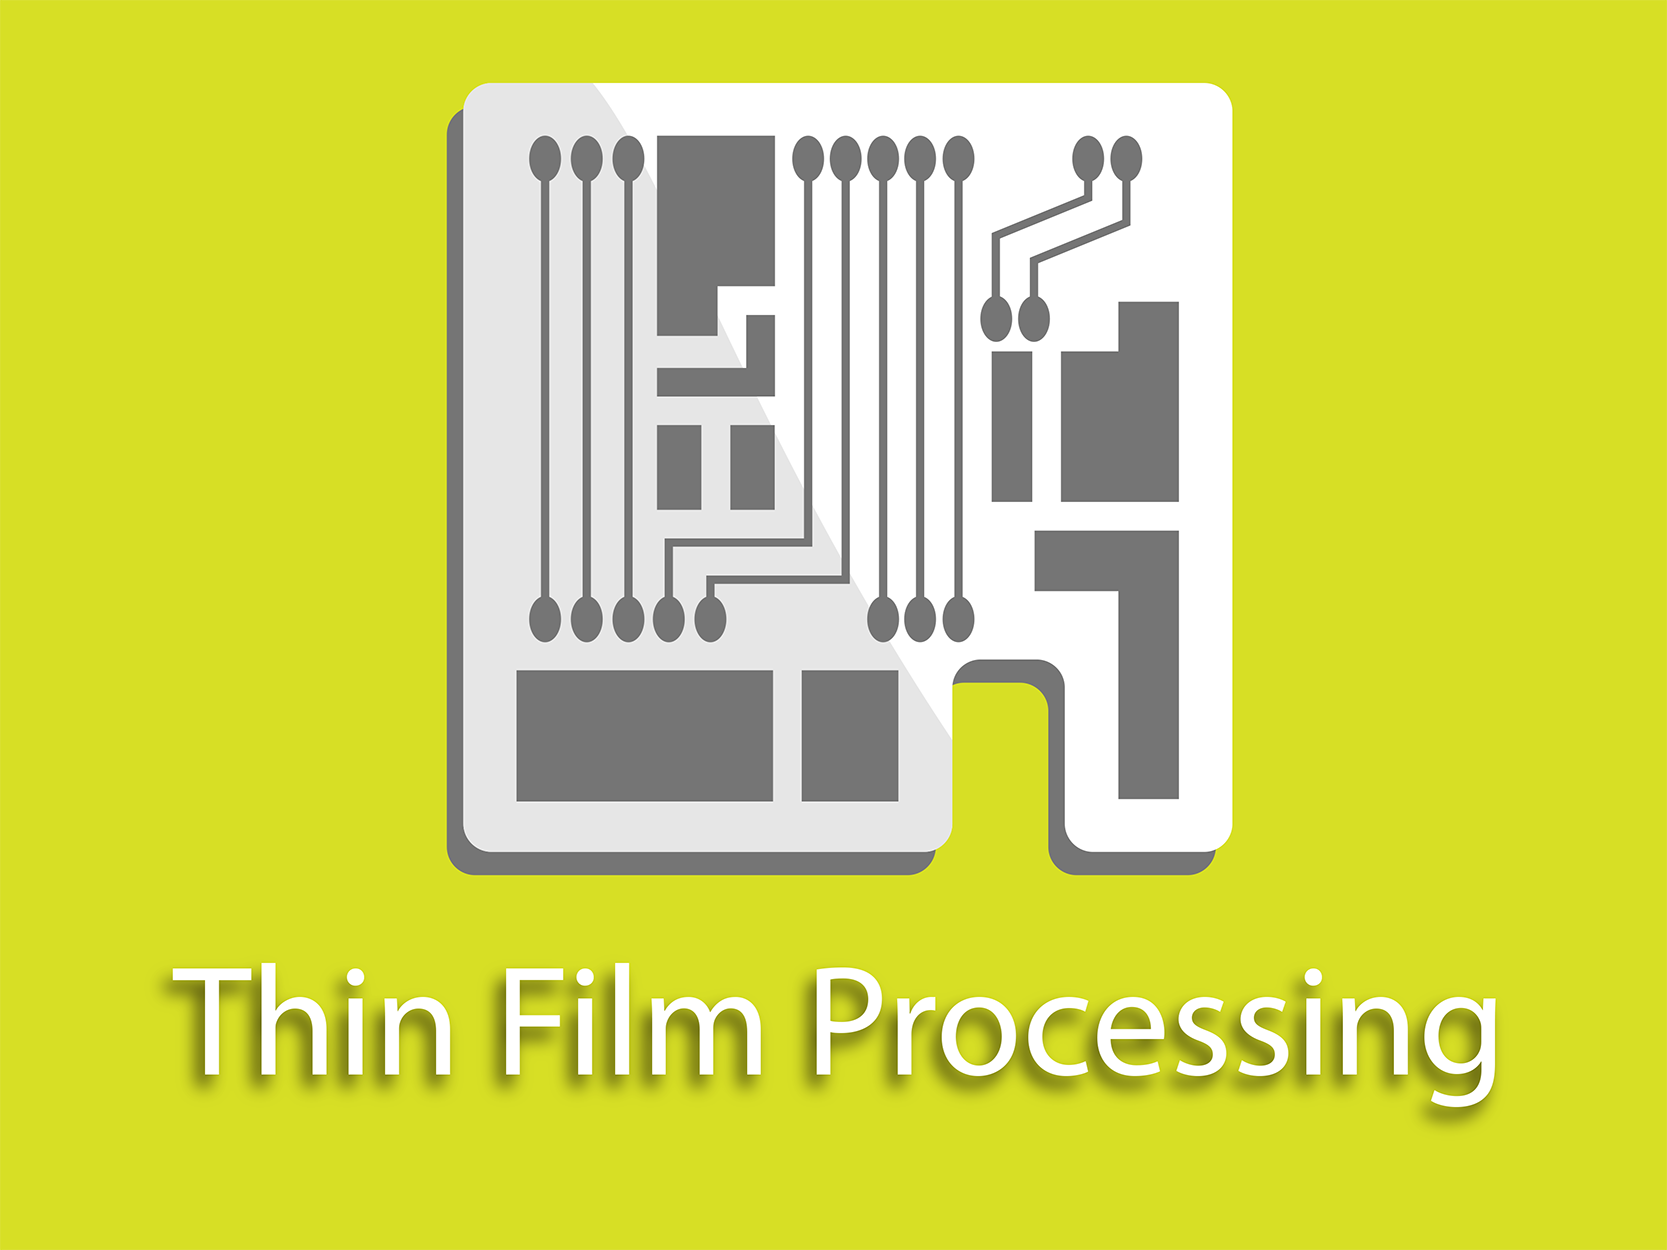 Click here to see the full list of thin-film processing tools